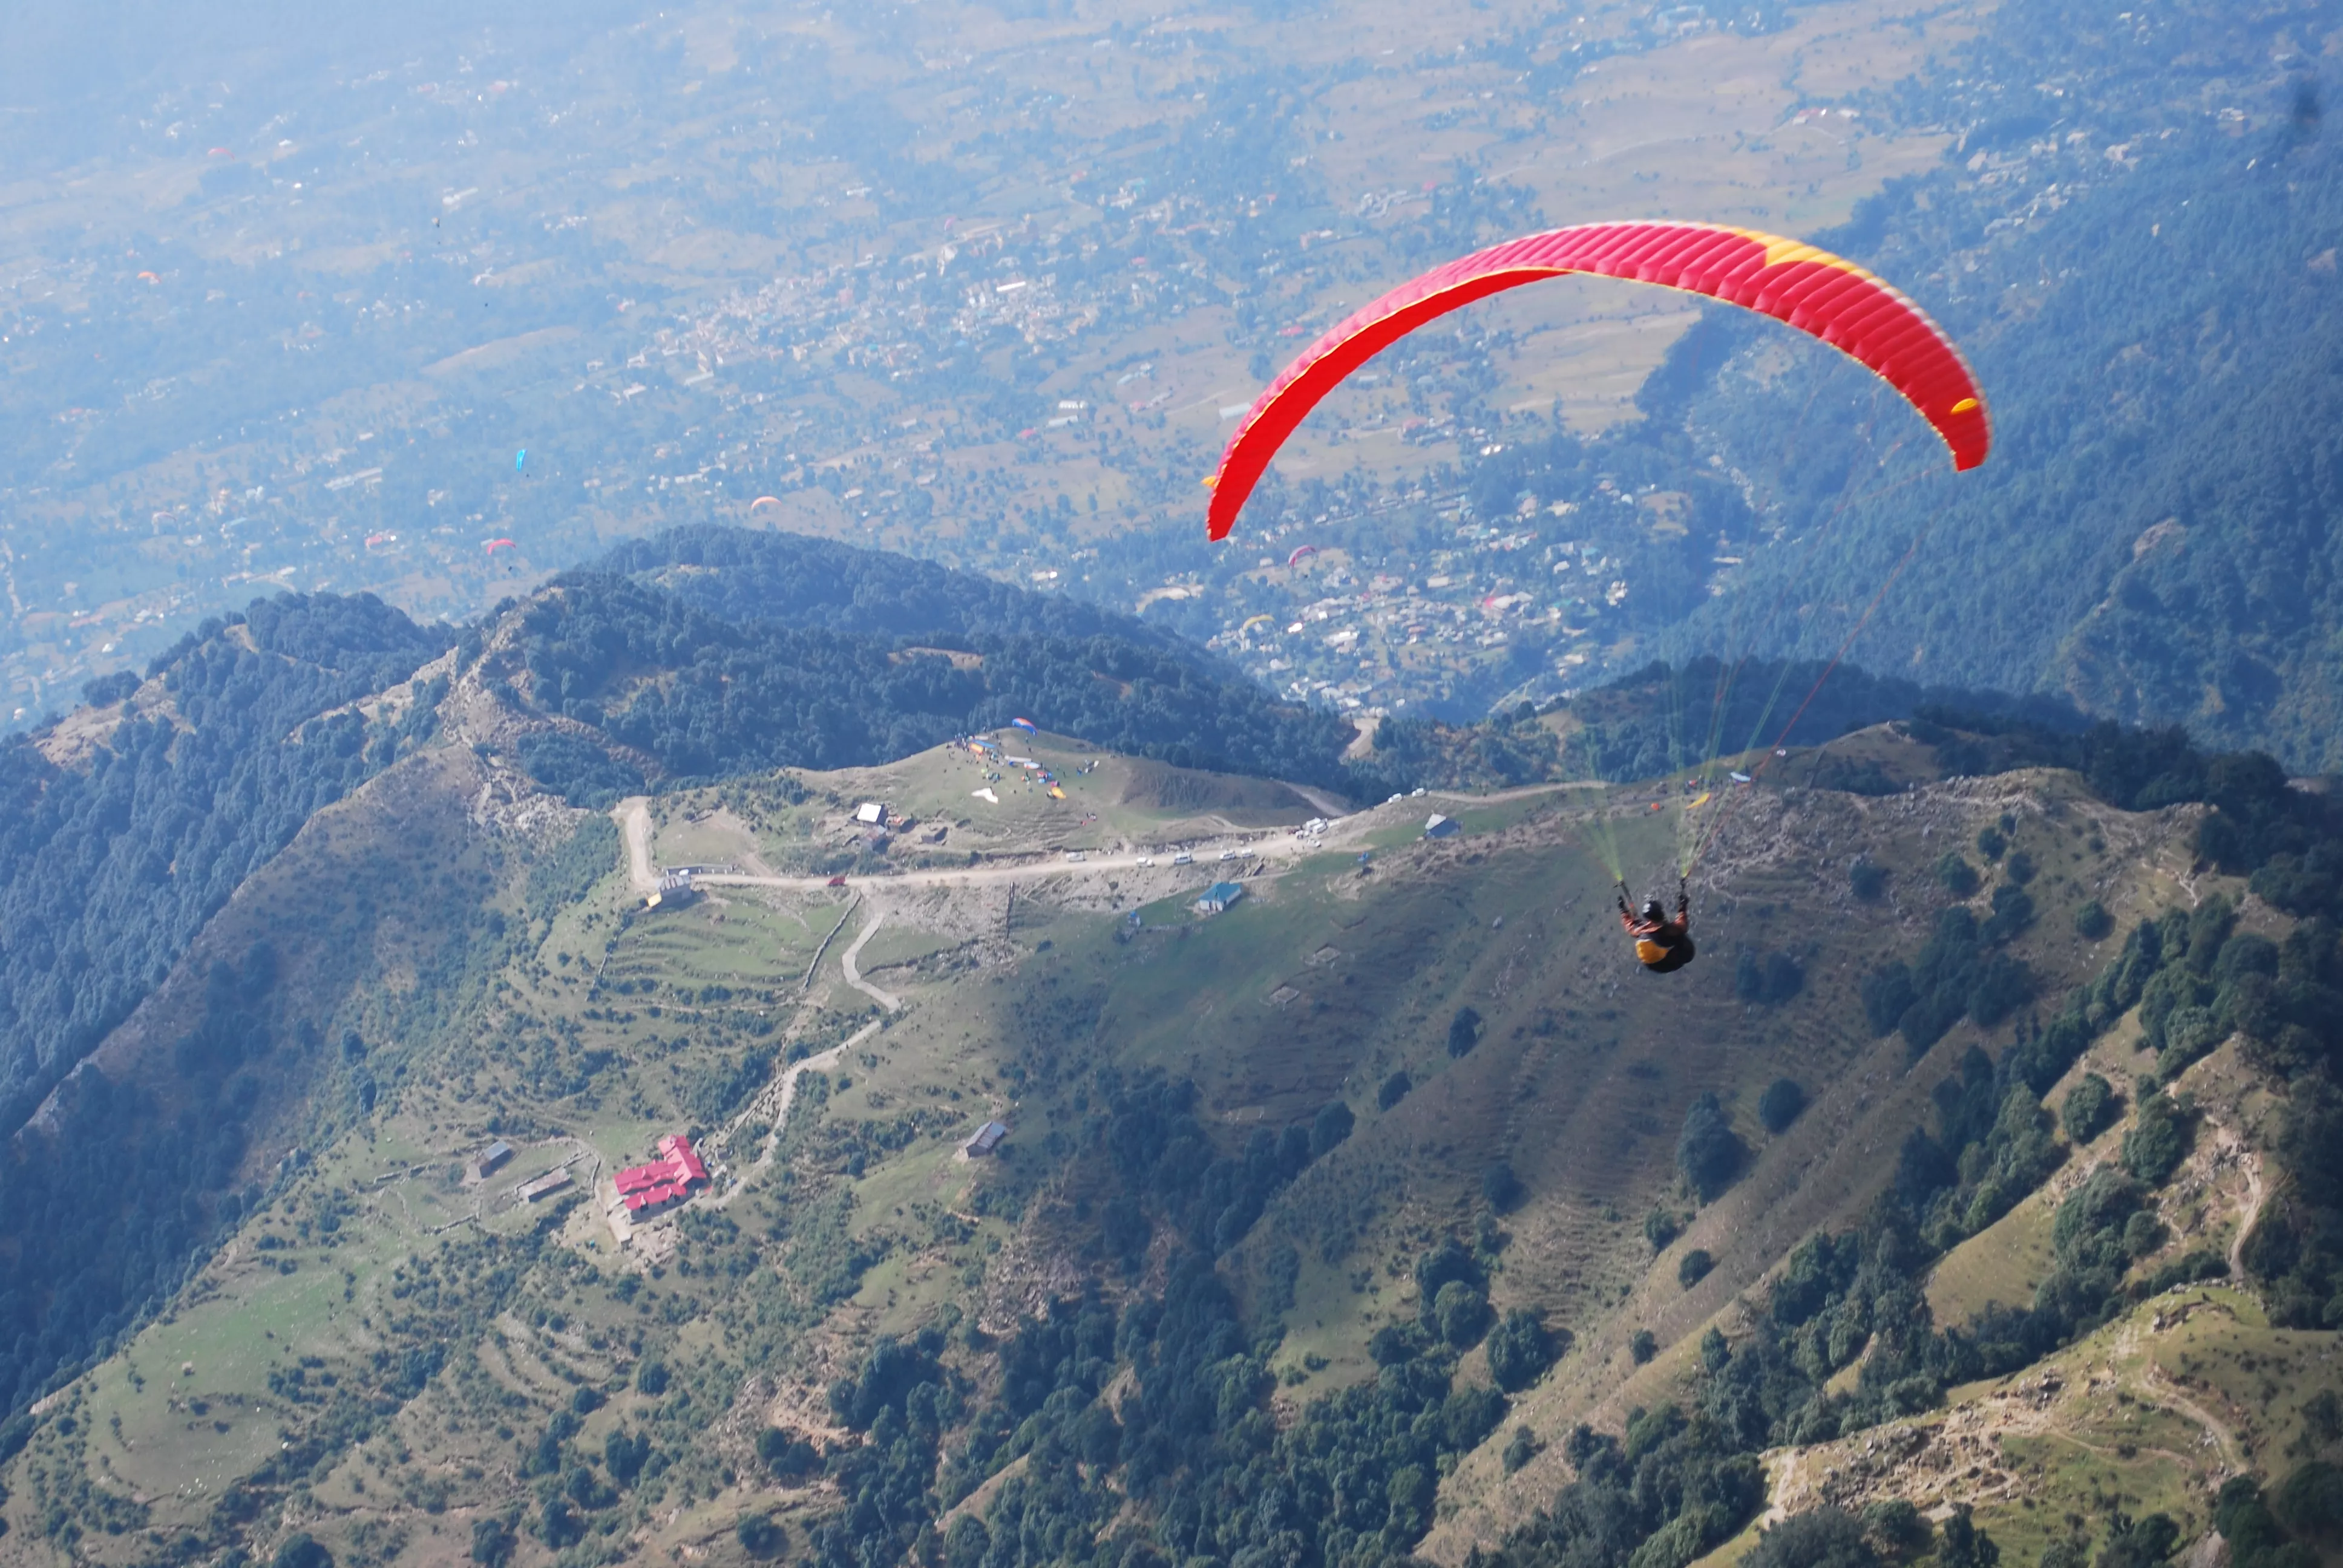 Indus Paragliding School in India, Central Asia | Paragliding - Rated 1.2